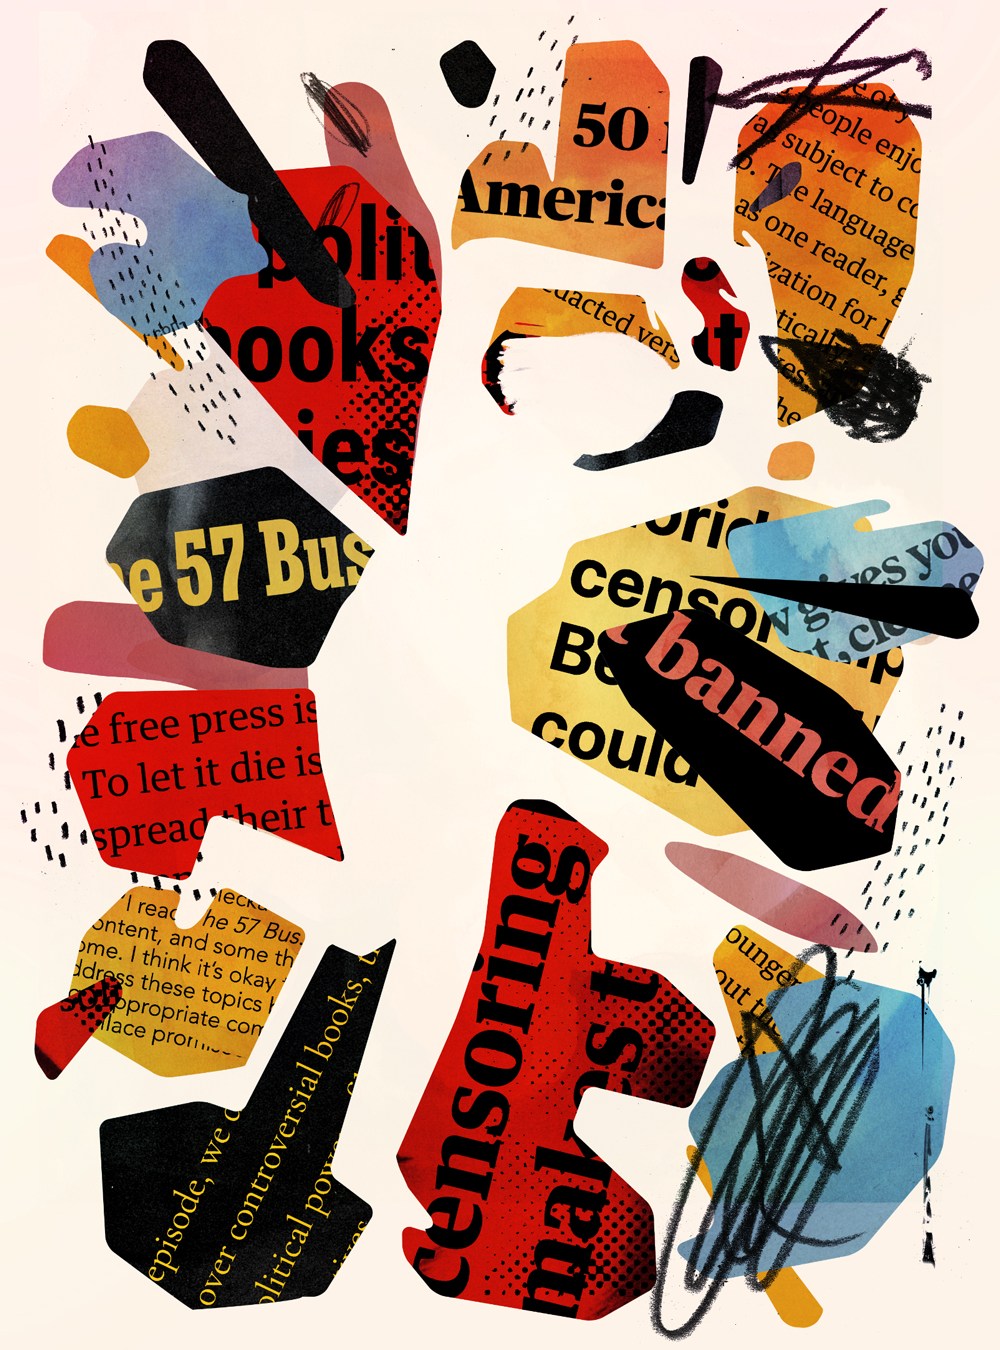 A collage of colorful amorphous shapes of cut paper, framed by distressing scribbles. The paper snippets are a mixture of clips of literature as well as newspaper headlines about the censorship of books. The sharp-edged shapes point towards the center of the illustration, where the negative space creates the form of an author under attack.